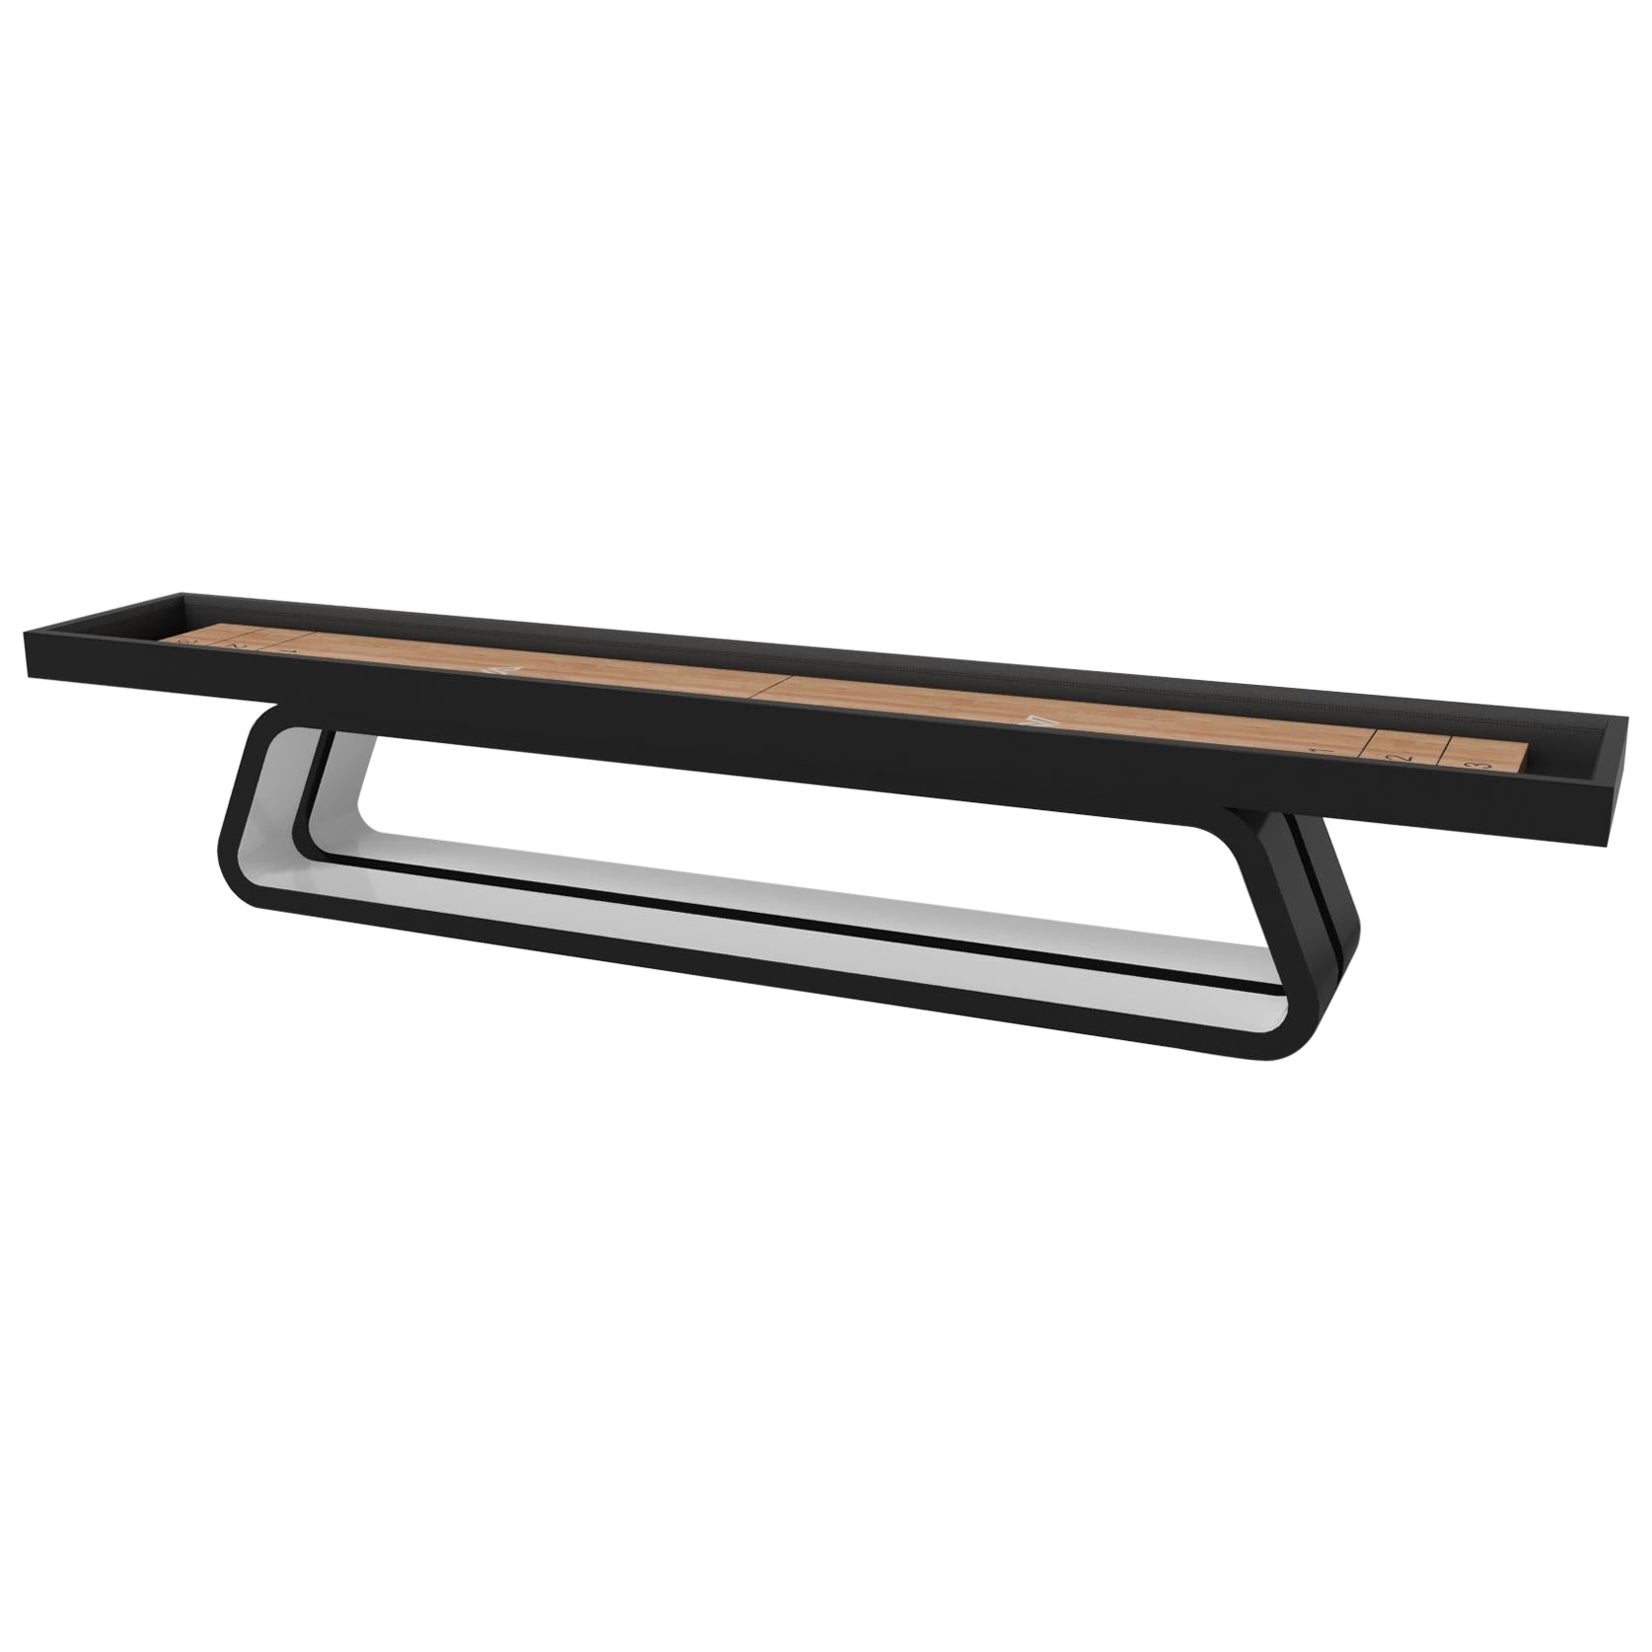 Elevate Customs Luge Shuffleboard Tables / Solid Pantone Black Color in 18' -USA